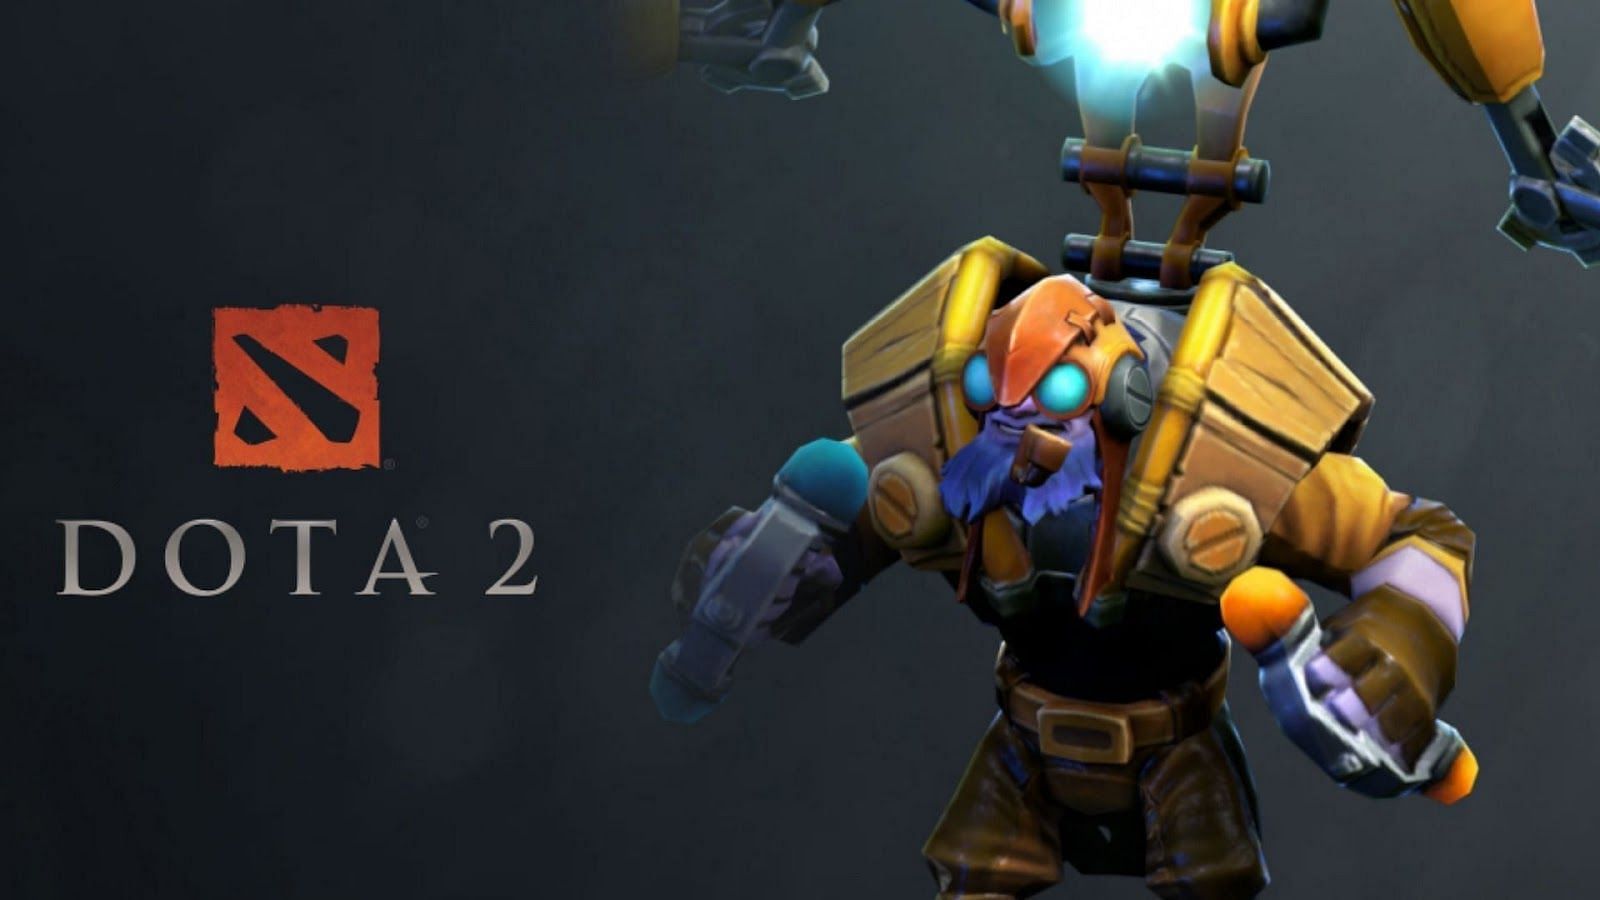 Dota 2 is free or not фото 48